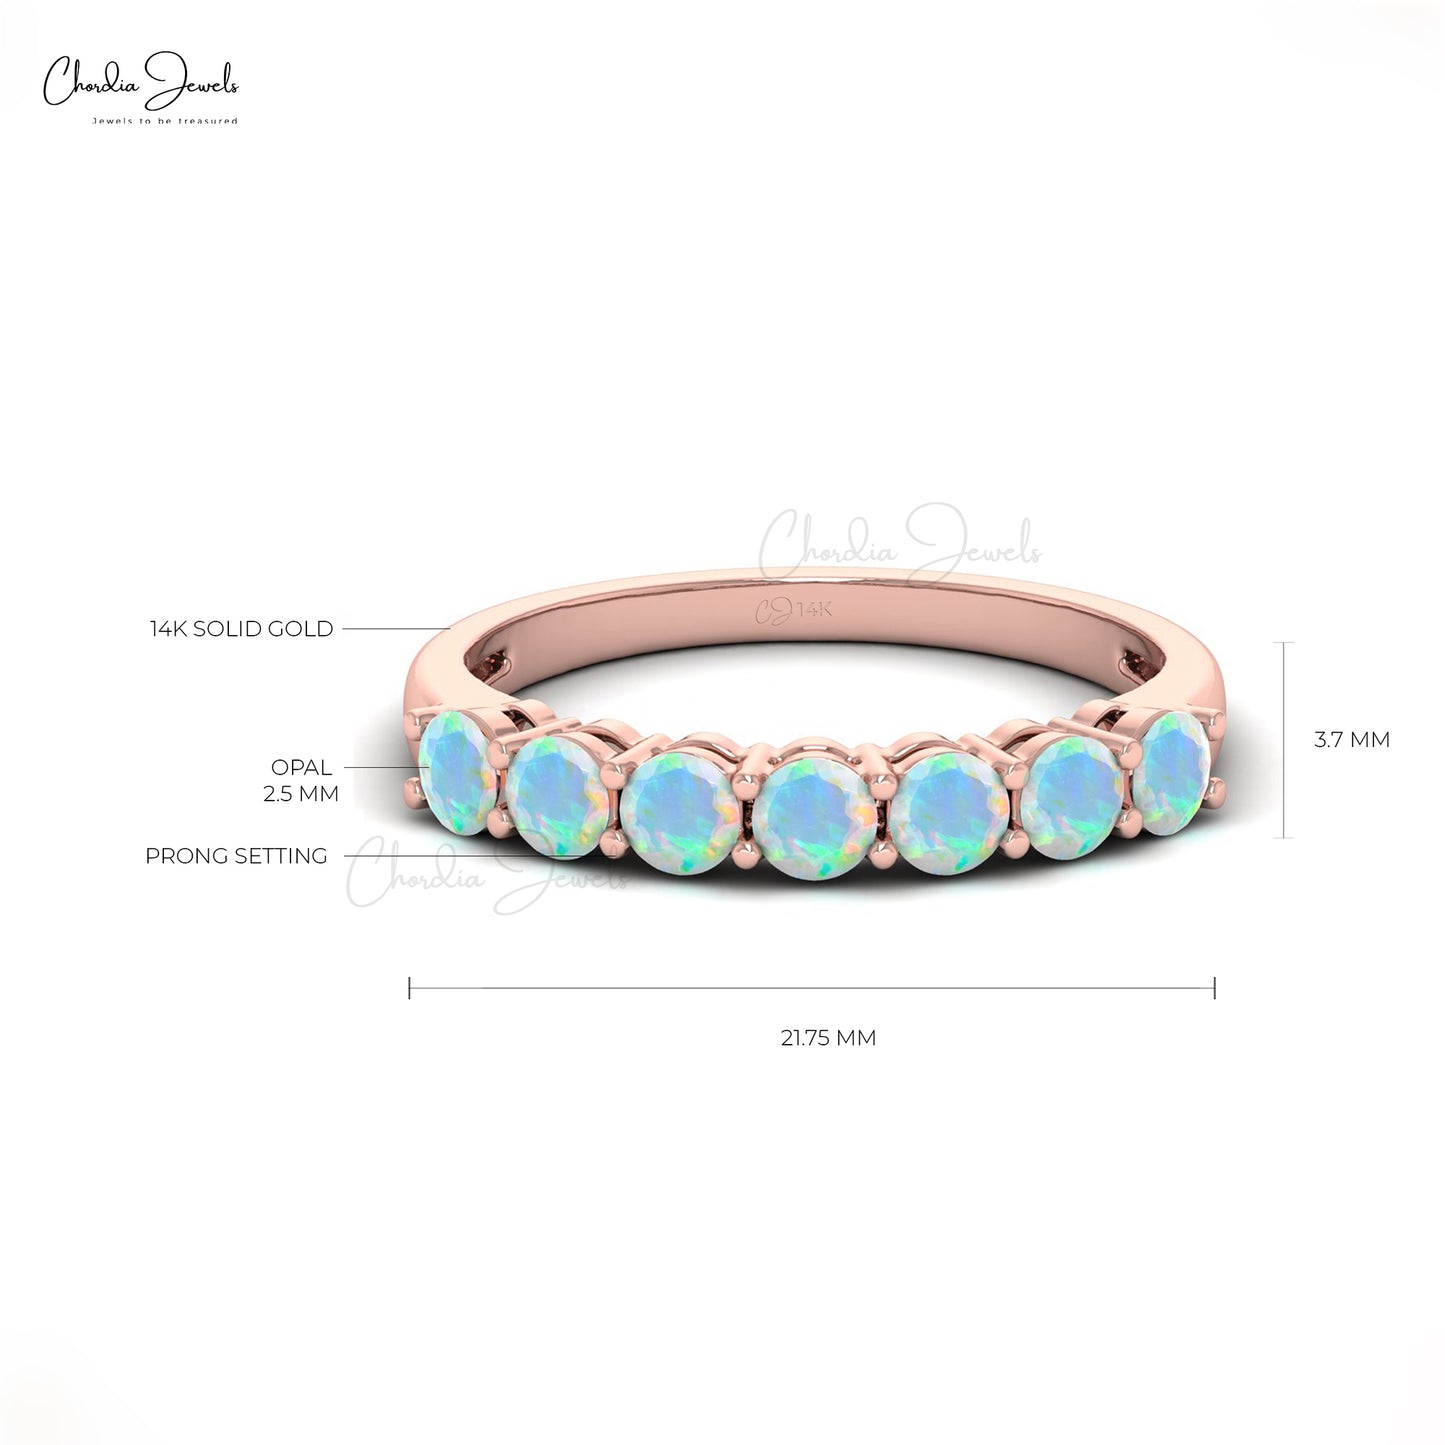 3mm Round Cut Natural Opal Half Eternity Band Ring, Gemstone Band For Women in 14k Solid Gold